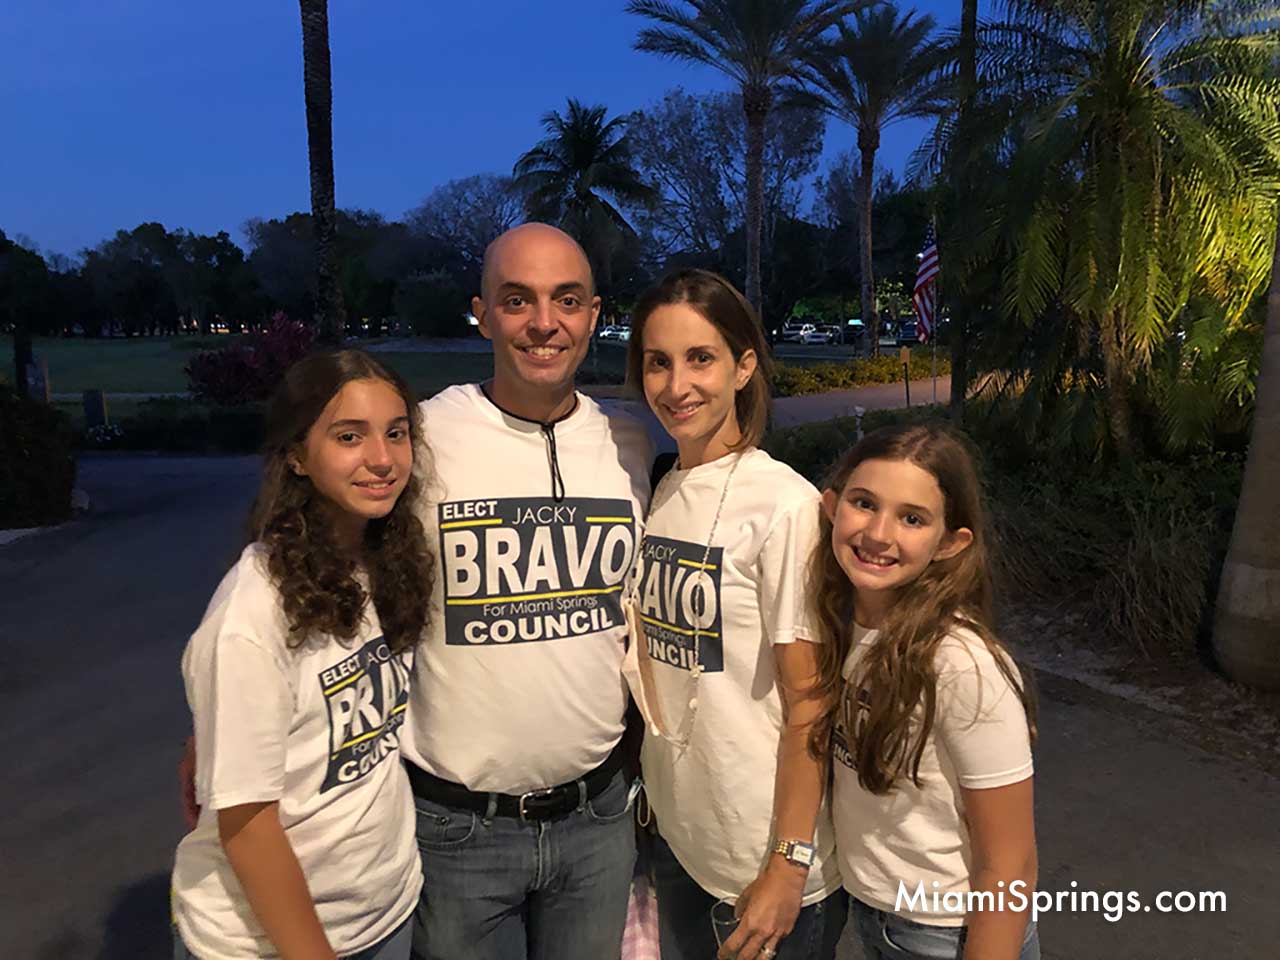 Jacky Bravo with her husband and daughters.